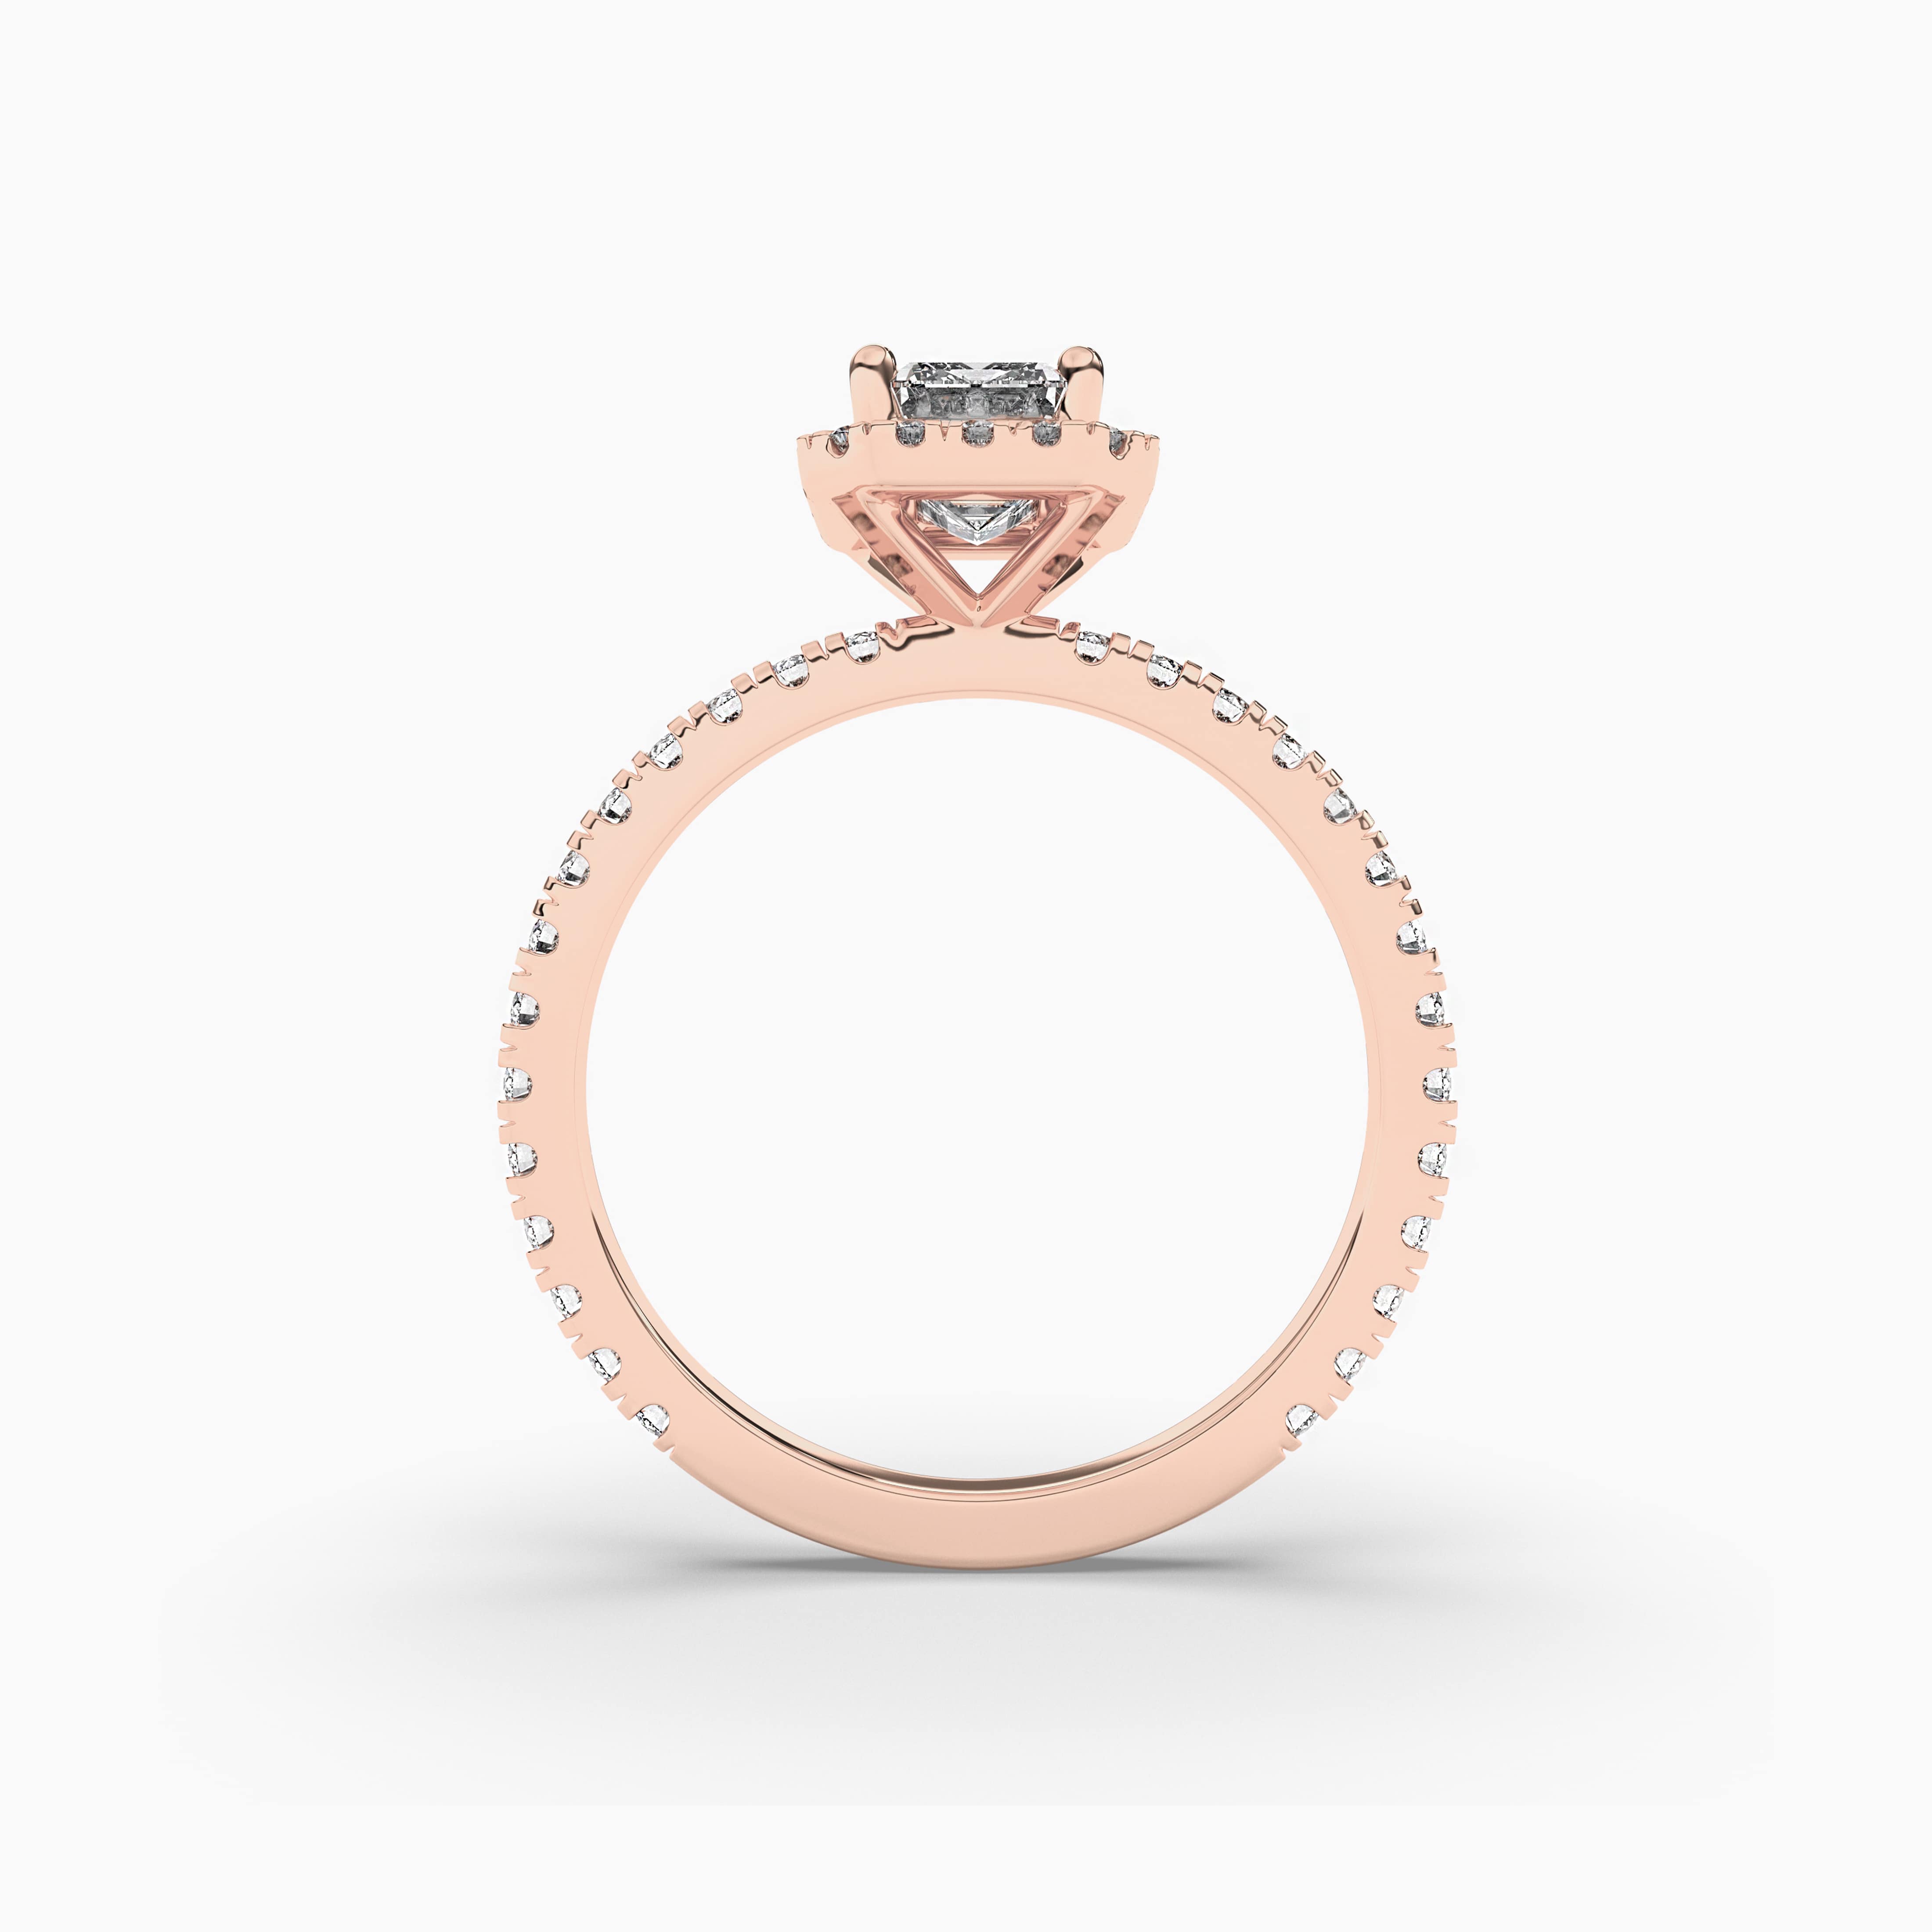 EMERALD CUT DIAMOND ENGAGEMENT RING WITH A DOUBLE HALO AXIS SETTING IN ROSE GOLD